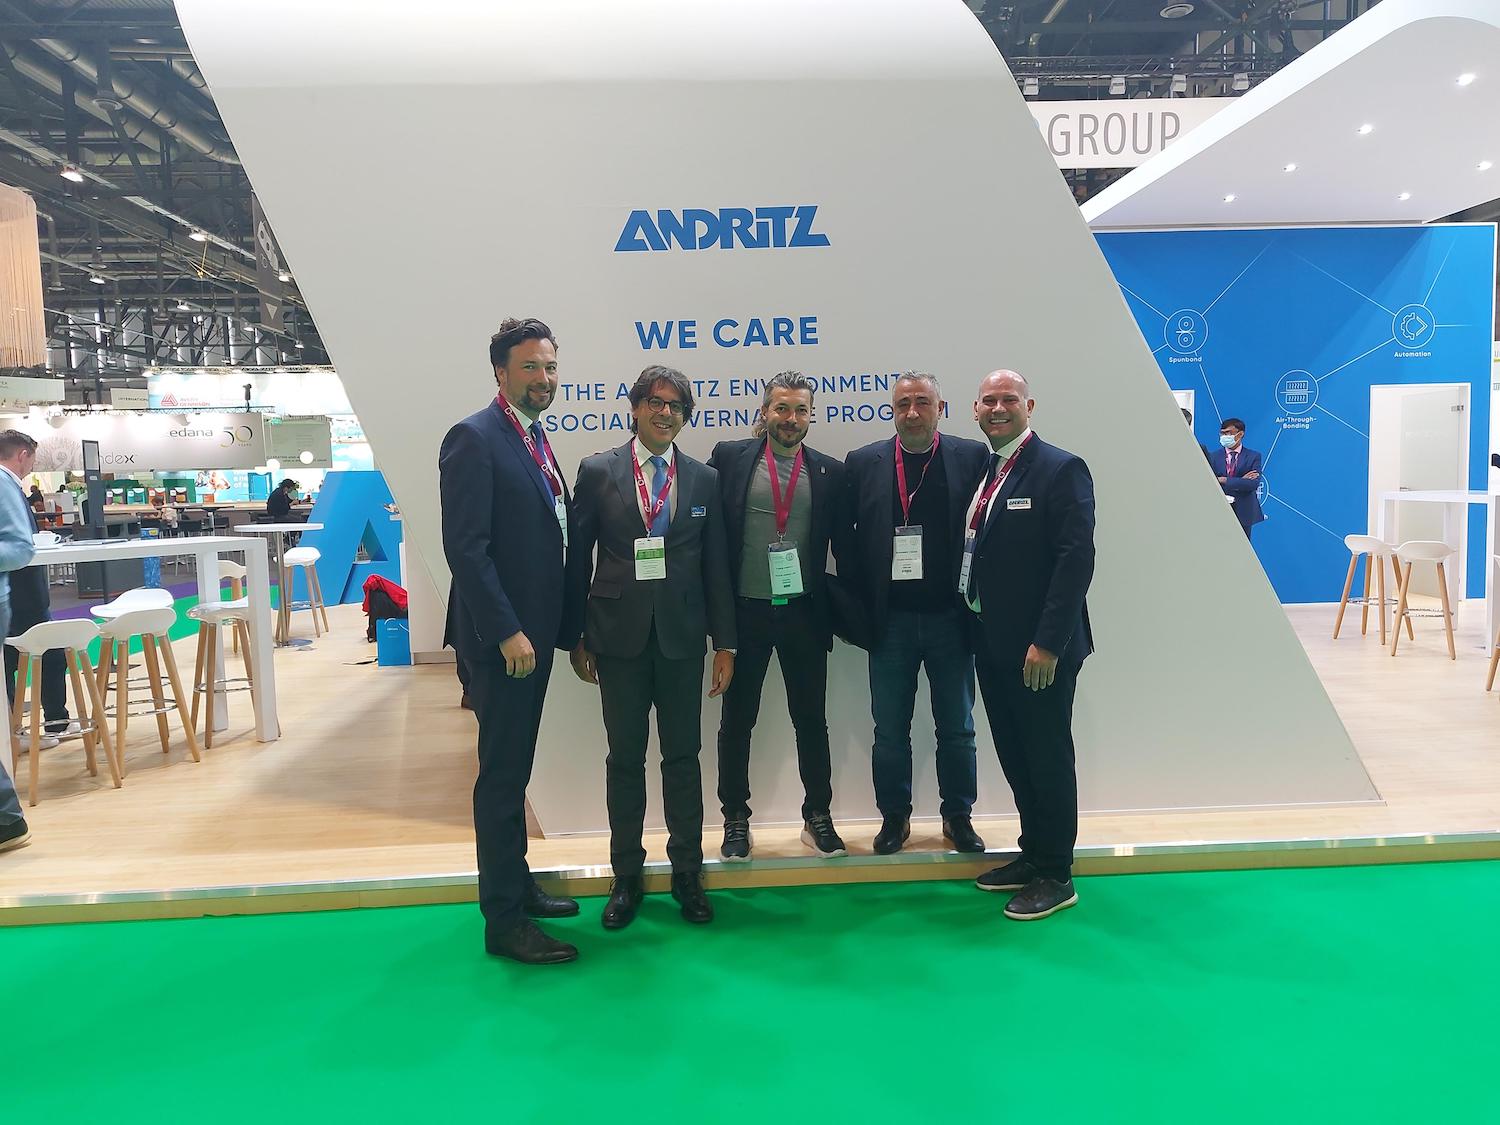 Members of the Andritz and Fouani teams at INDEX 2020. © Andritz